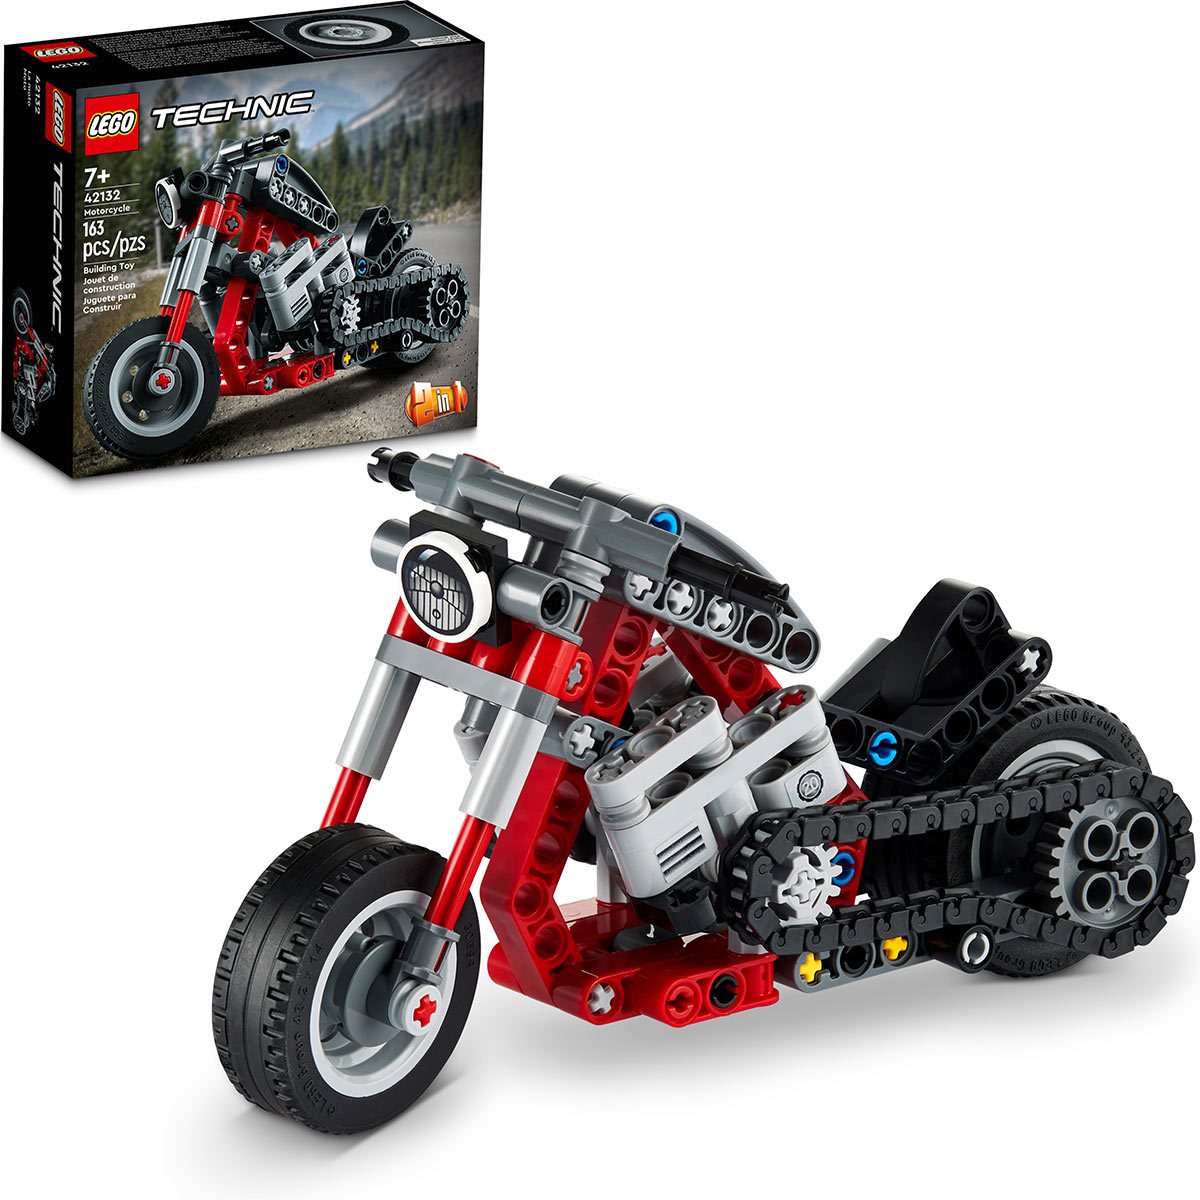 42132 - Motorcycle : My first Technic build since childhood :) :  r/legotechnic